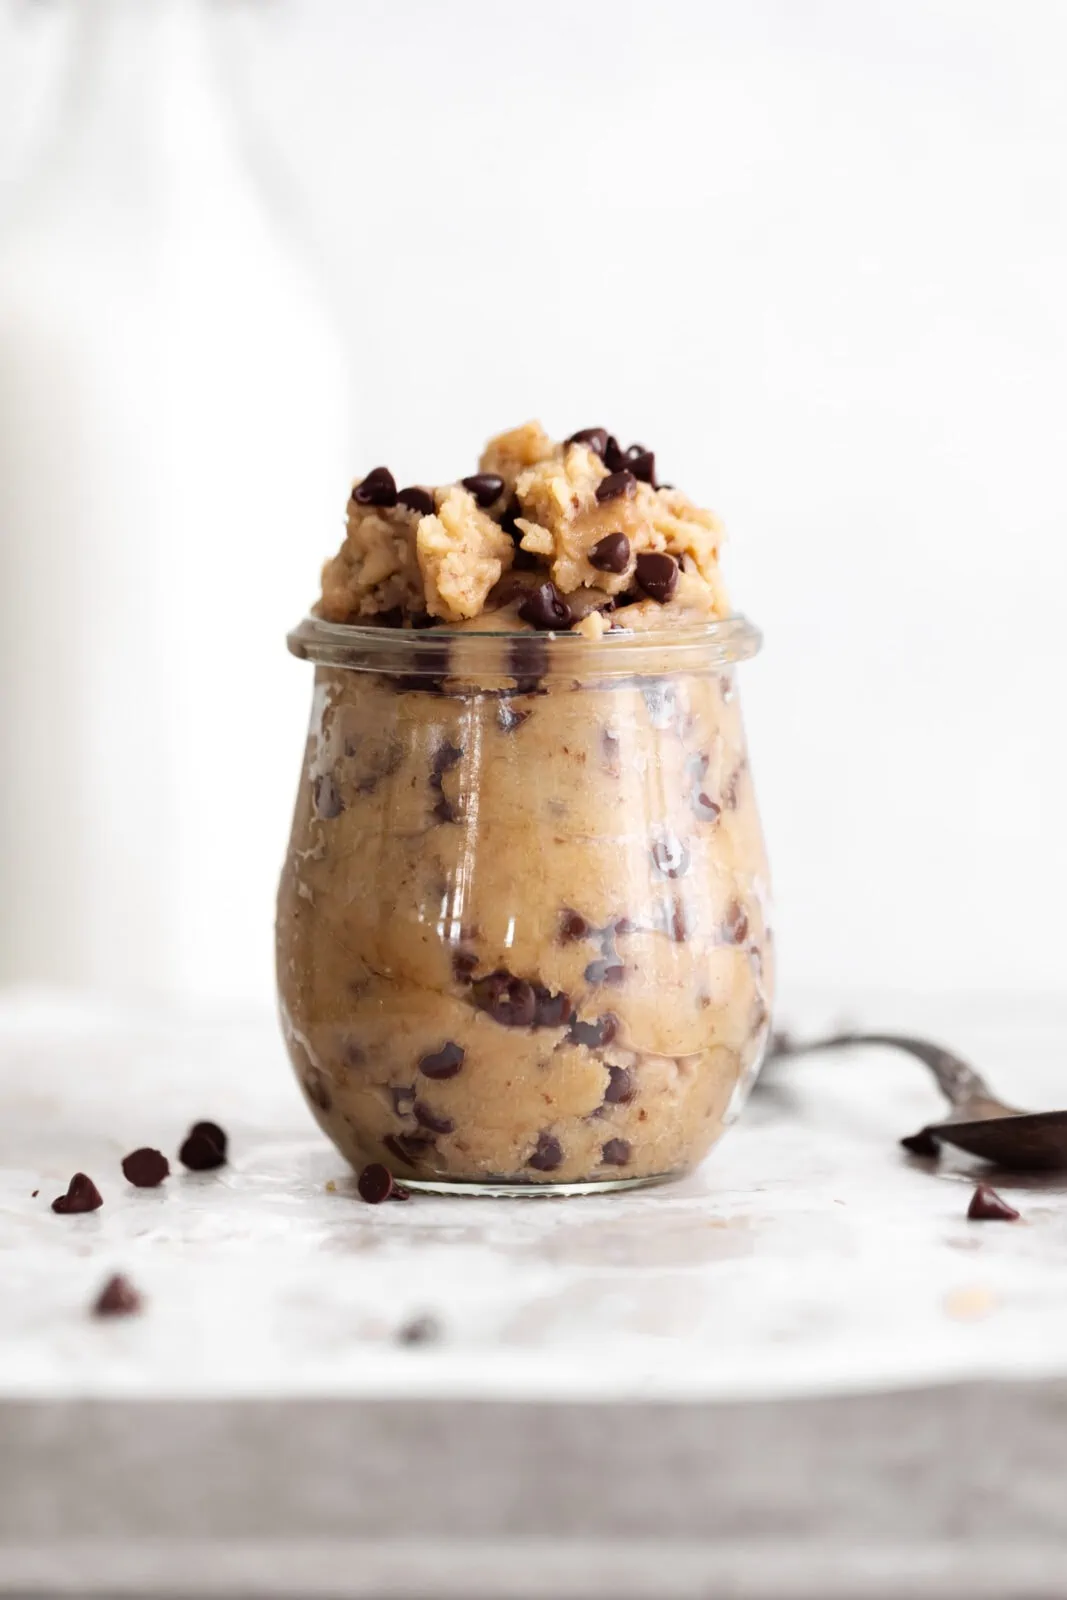 edible cookie dough with chocolate chips in a jar